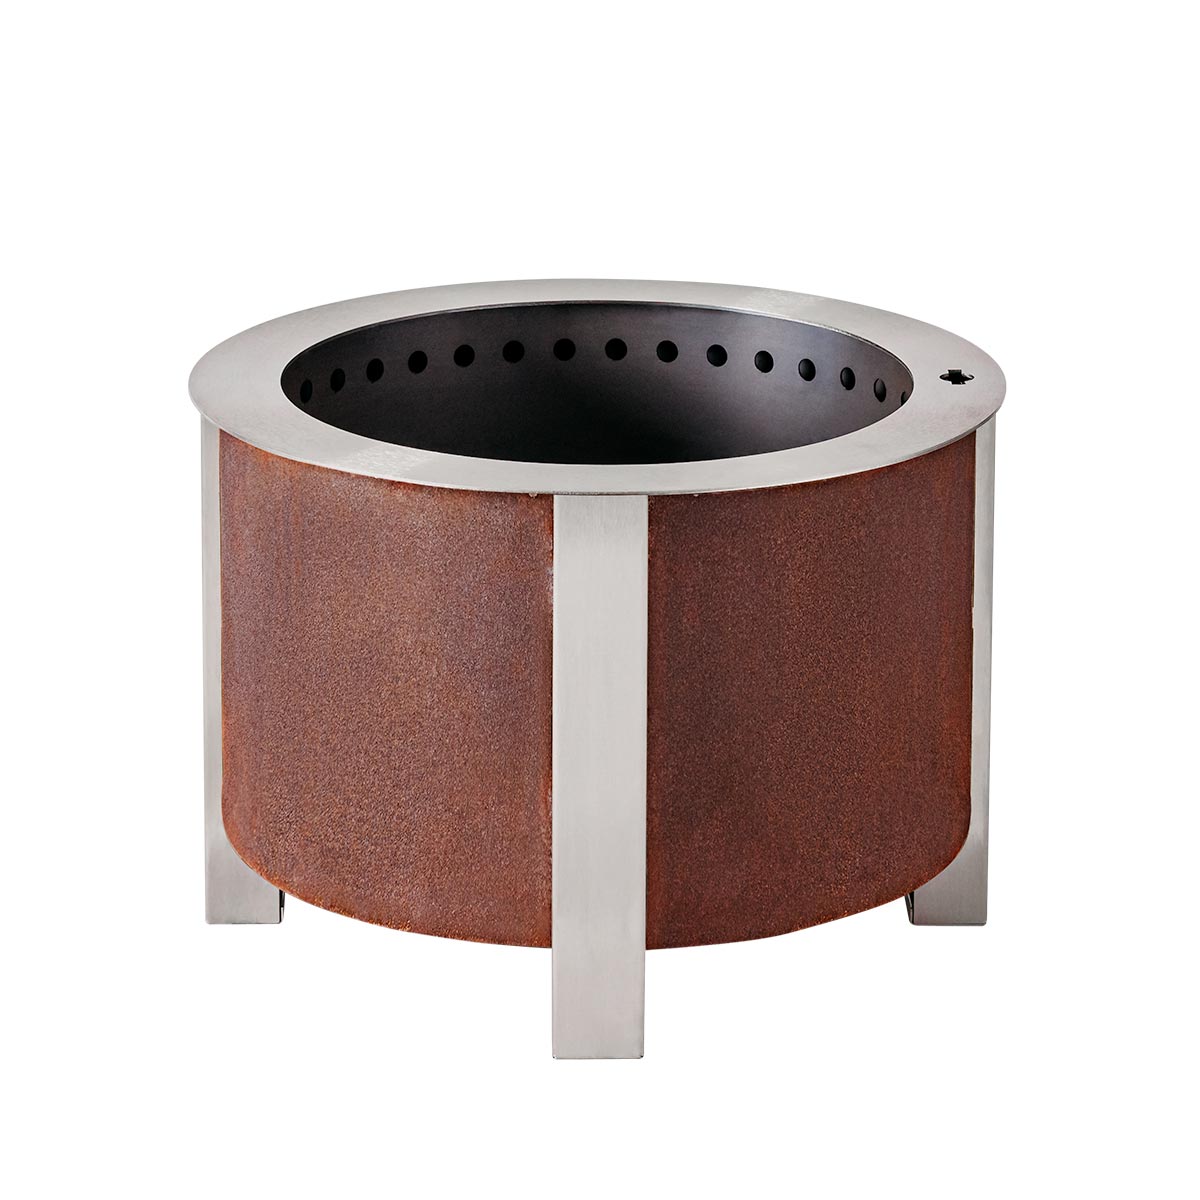 BREEO X Series 19 Smokeless Fire Pit (Patina) with Ash Removal Tool